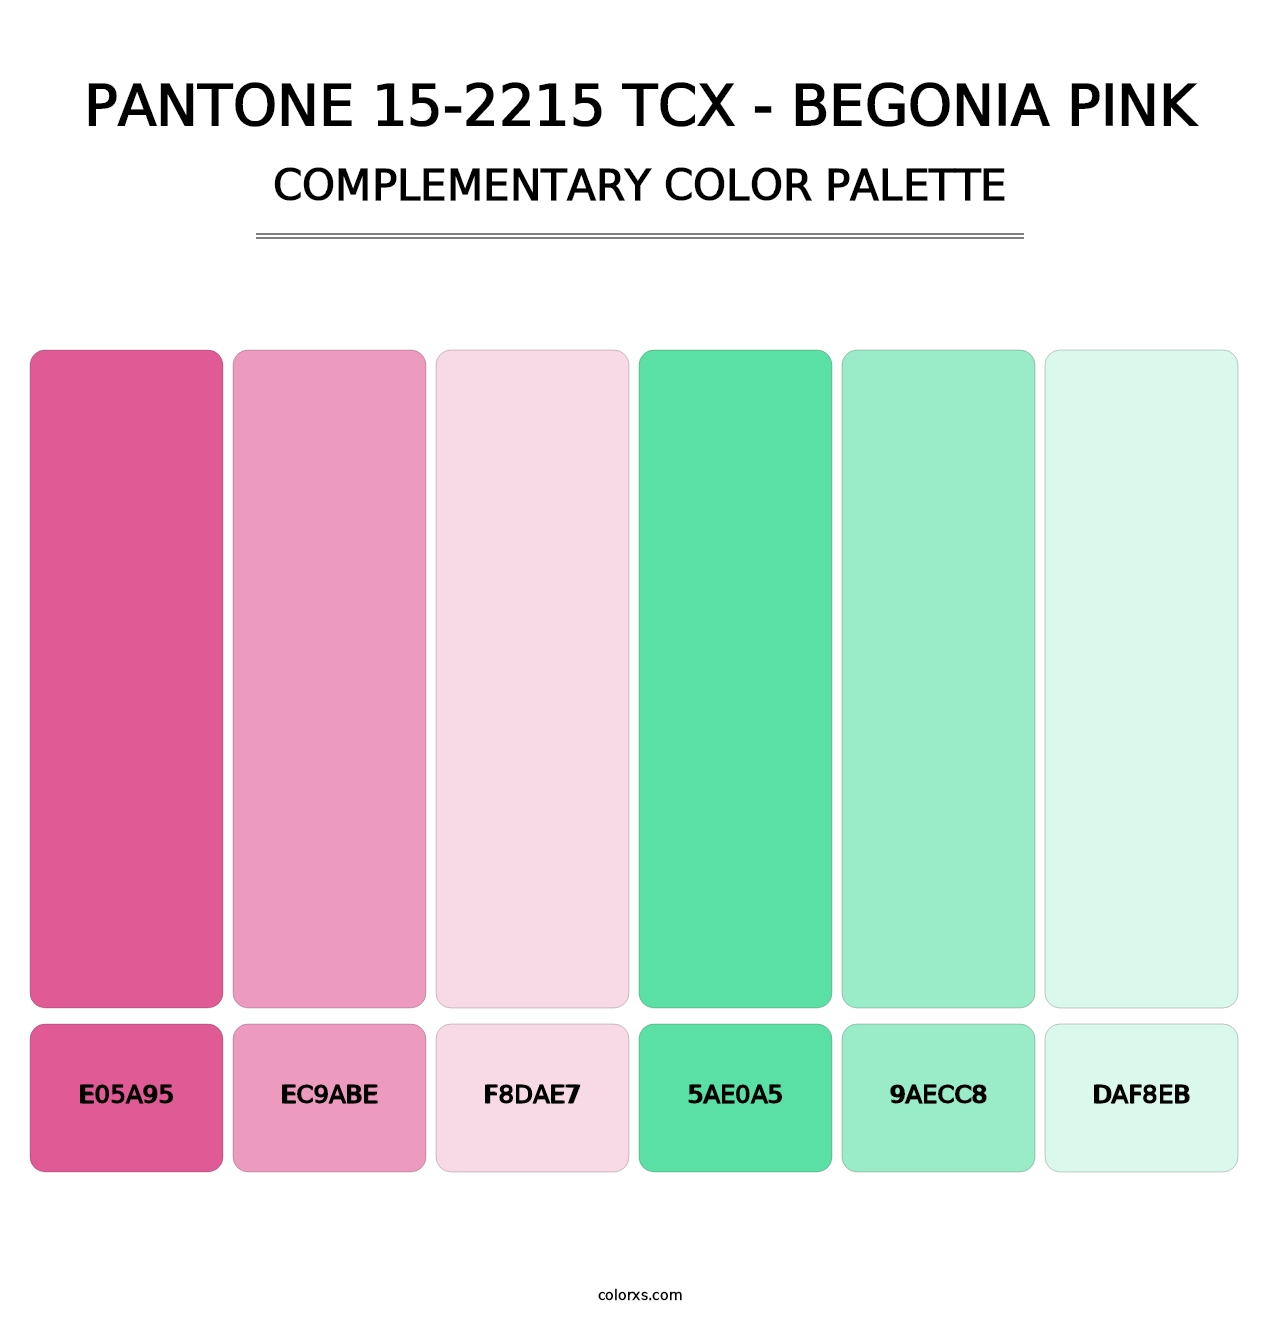 PANTONE 15-2215 TCX - Begonia Pink - Complementary Color Palette